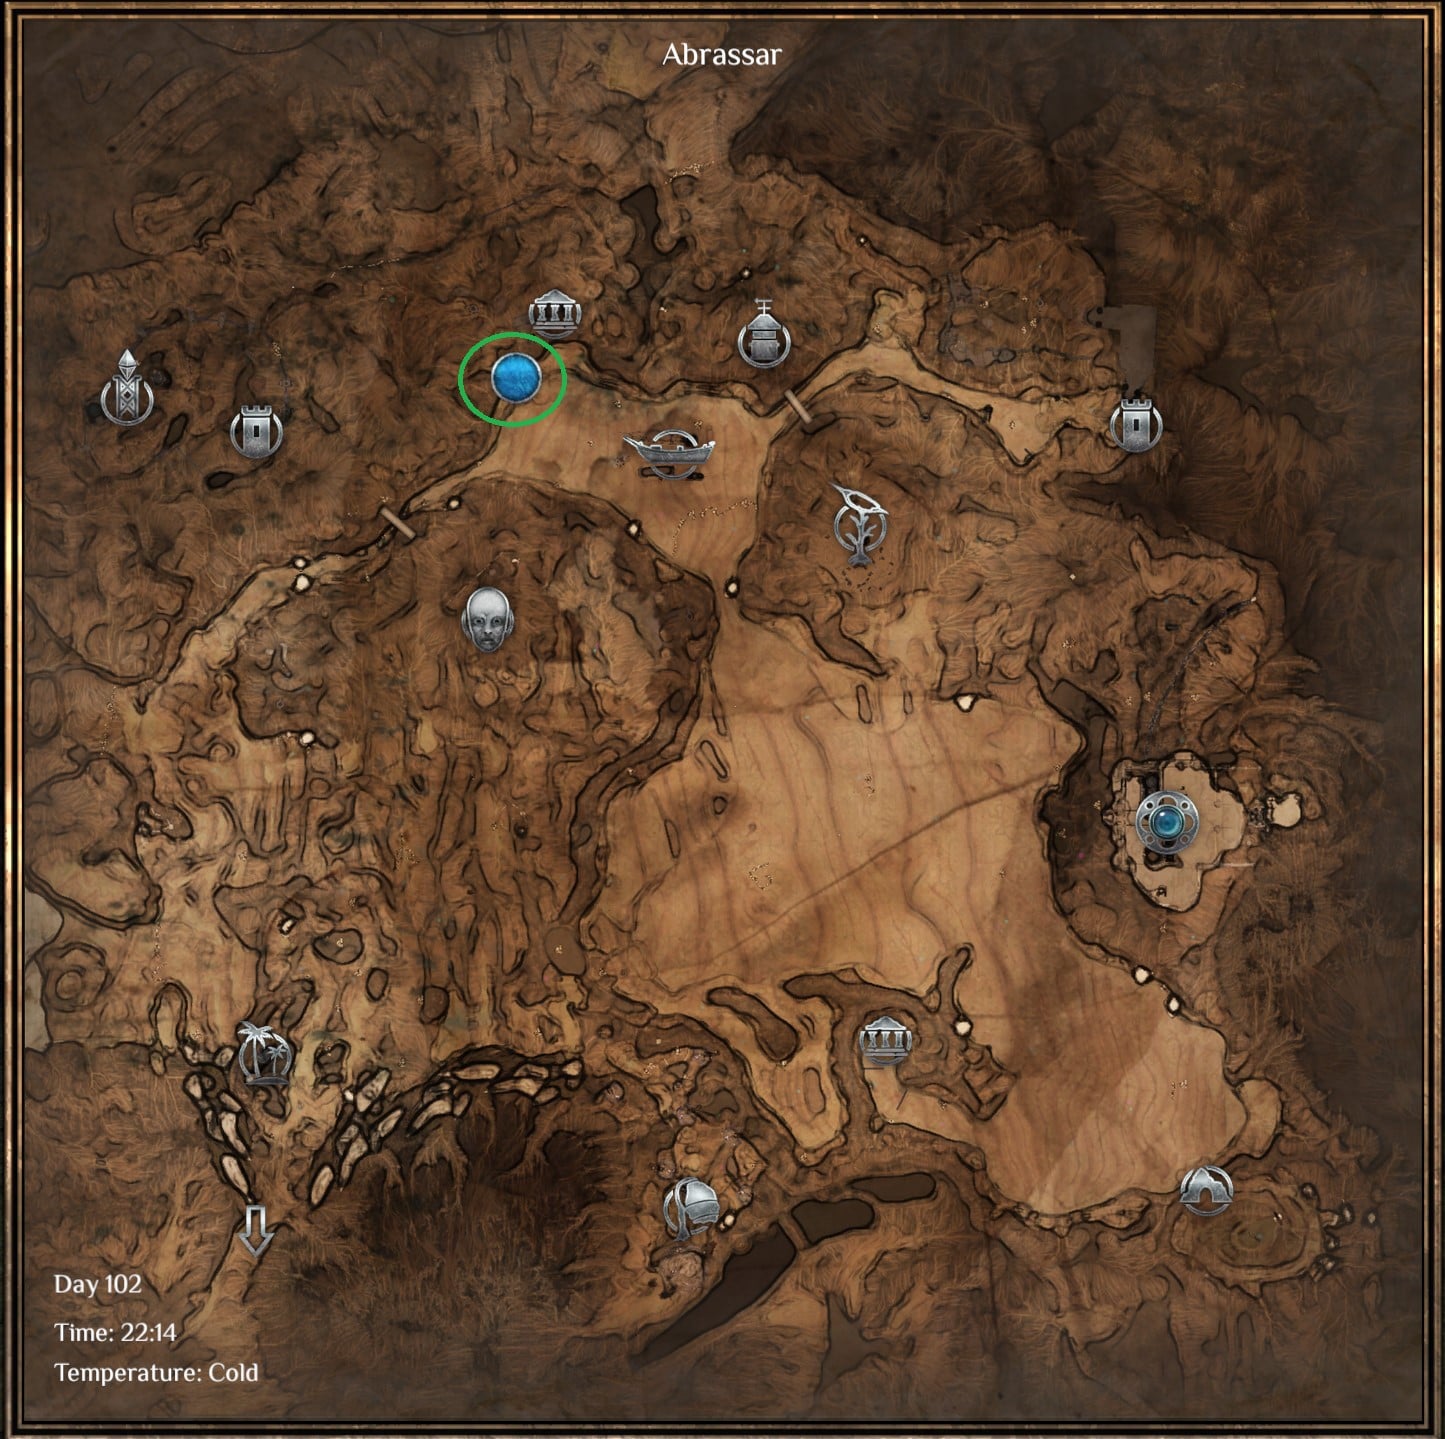 Outward: All Legacy Chest Locations